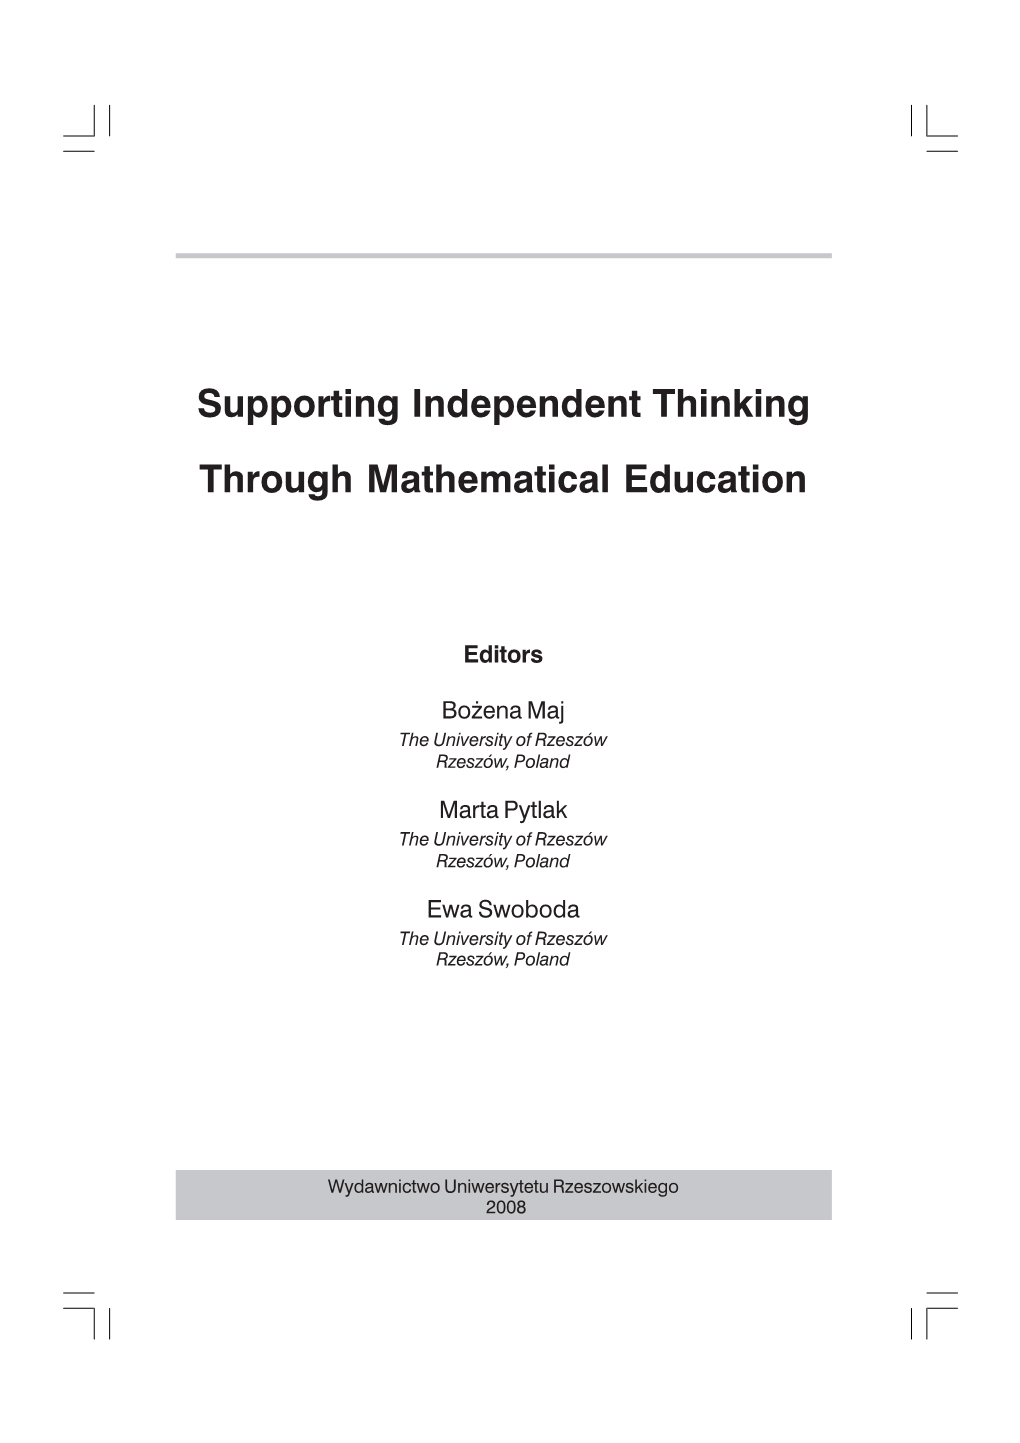 Supporting Independent Thinking Through Mathematical Education